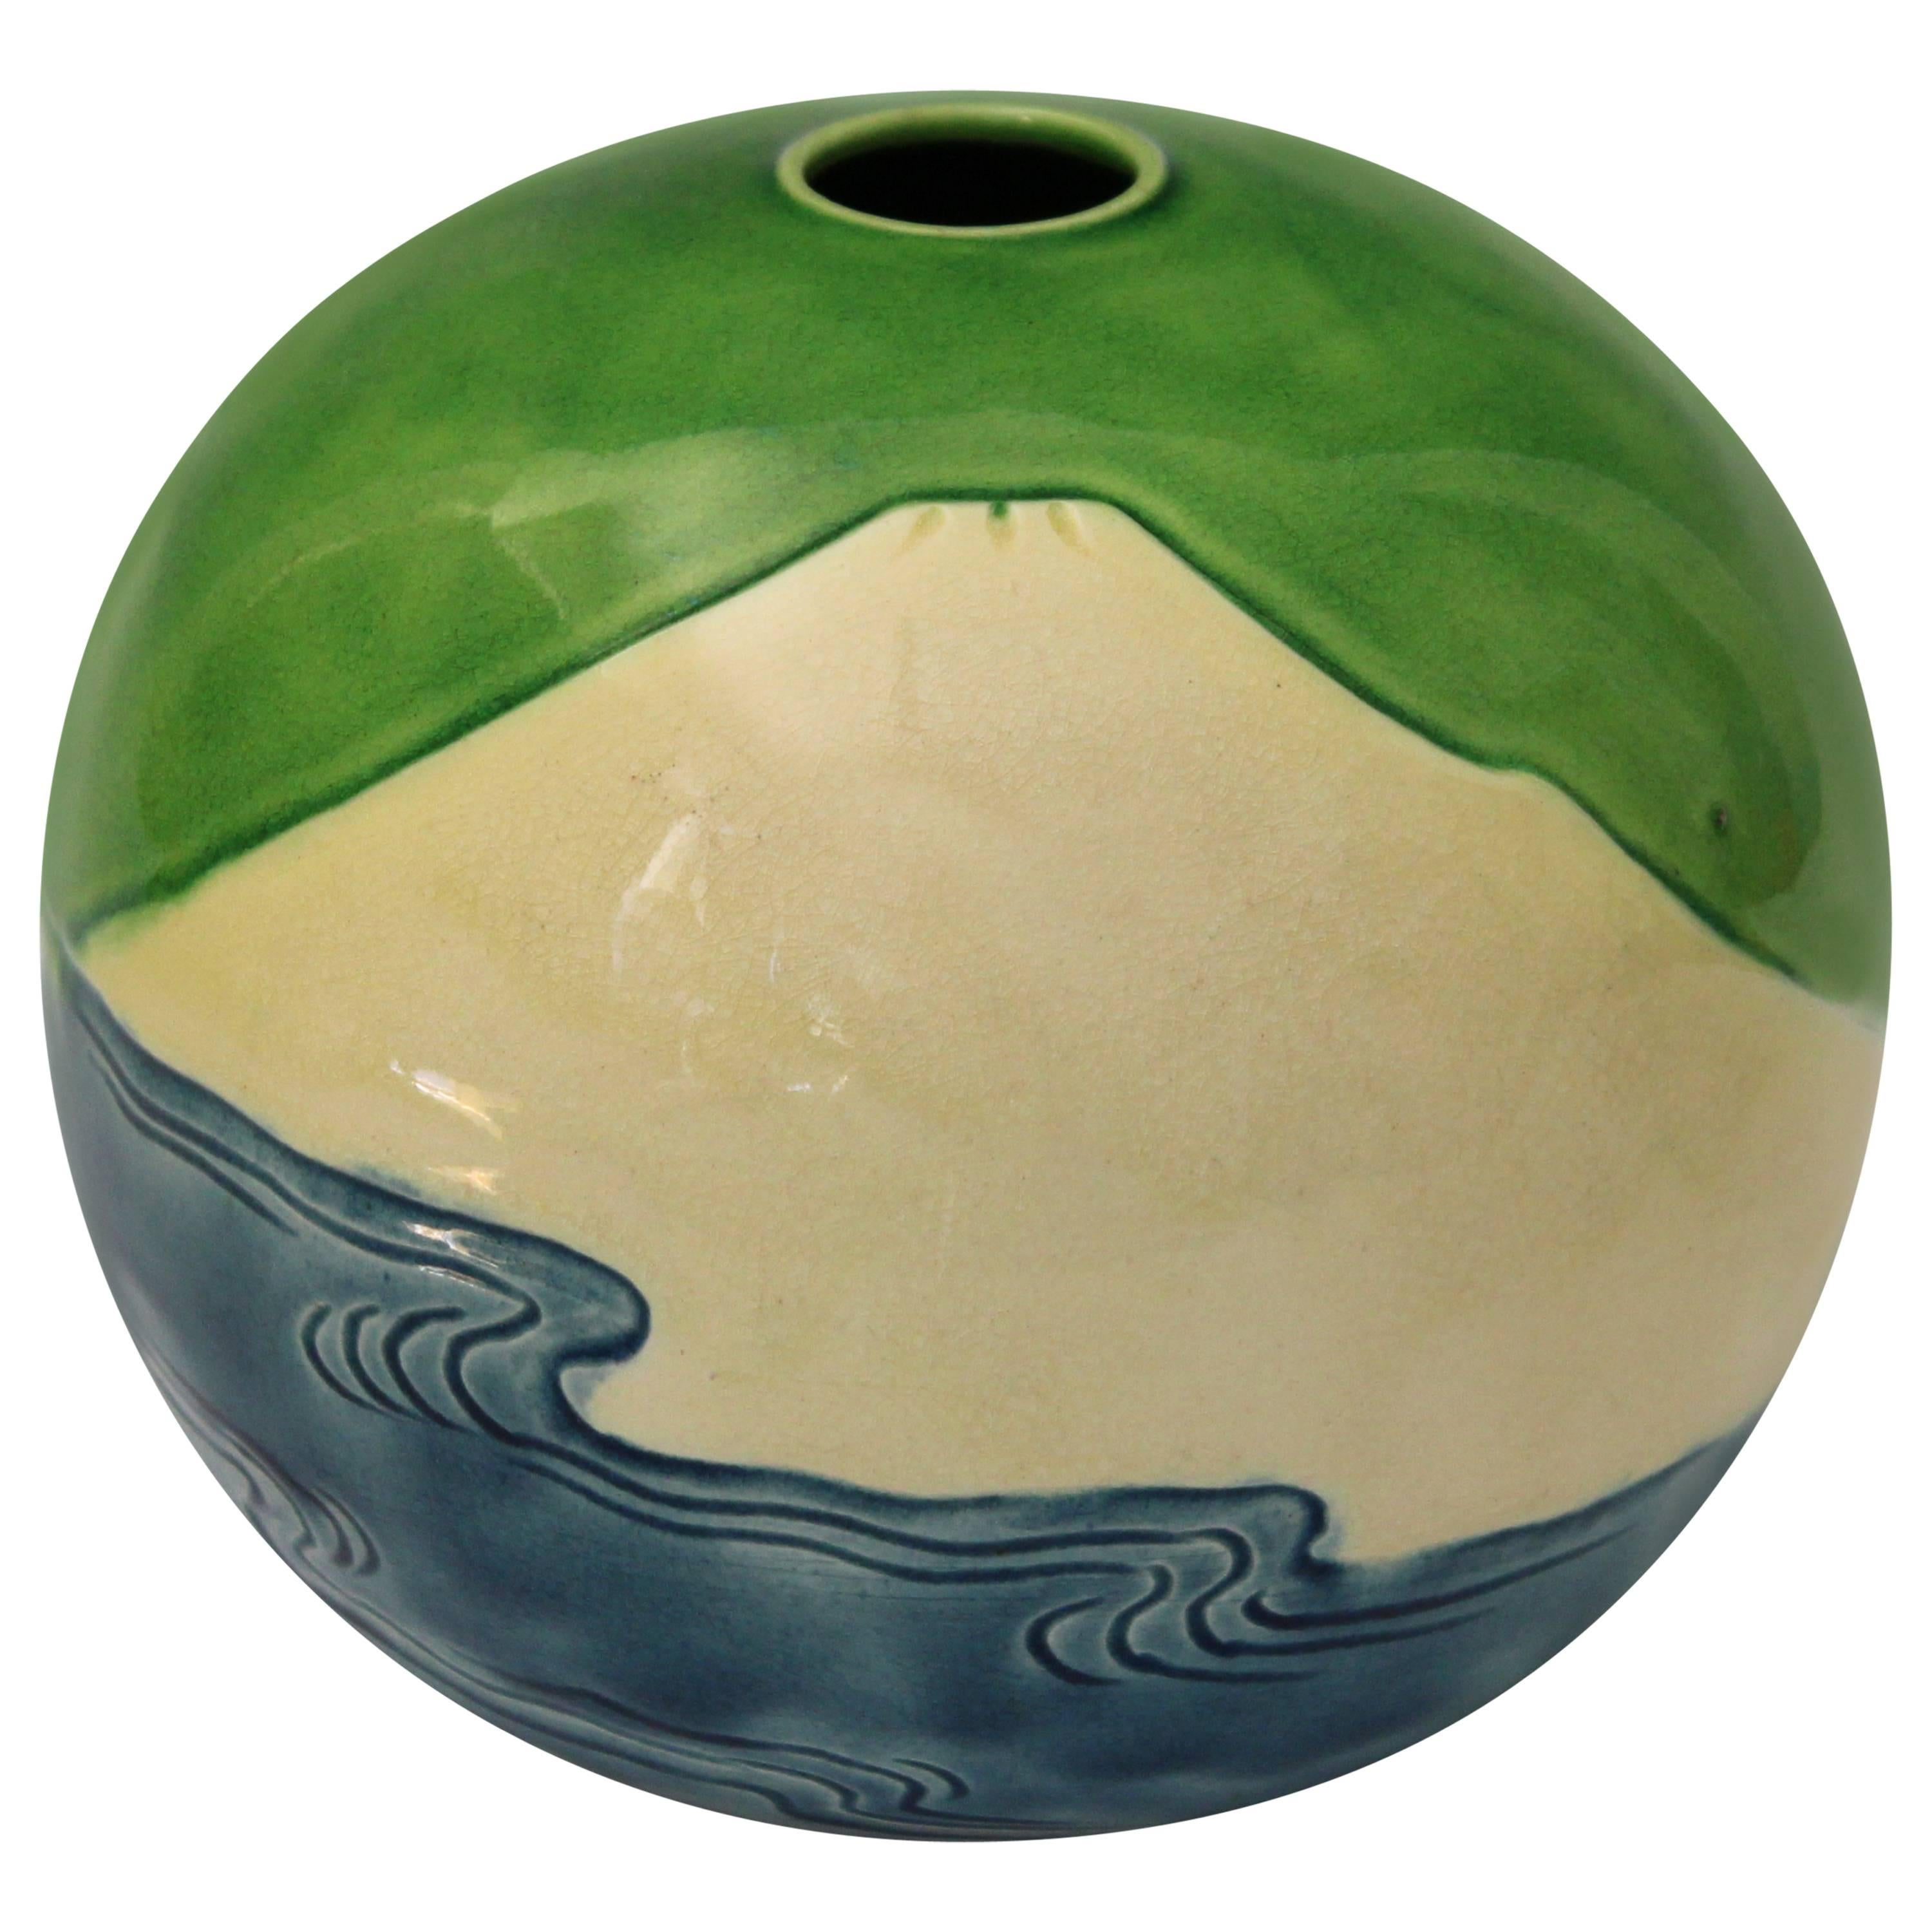 Spherical vase with incised image of a mountain above the ocean against a vibrant lime green sky. Impressed Kiln mark. Measures: 5